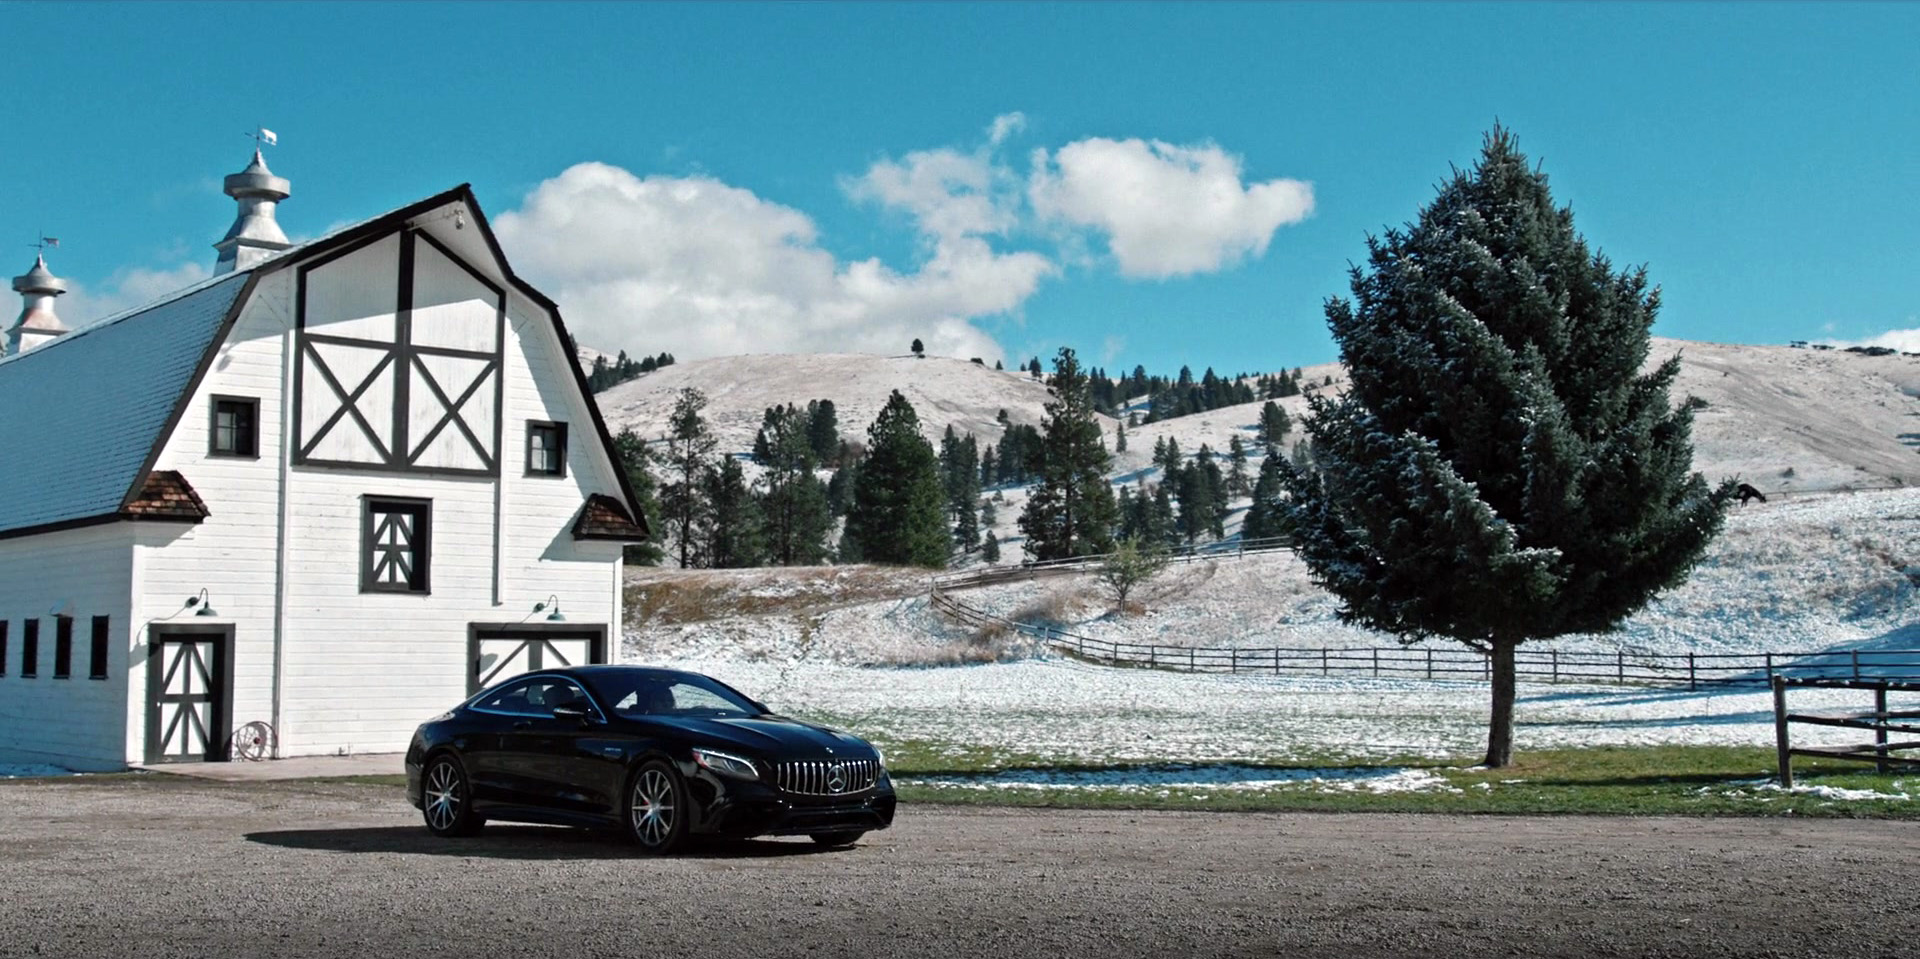 Beth's 2021 Mercedes AMG S 63 in Yellowstone TV show